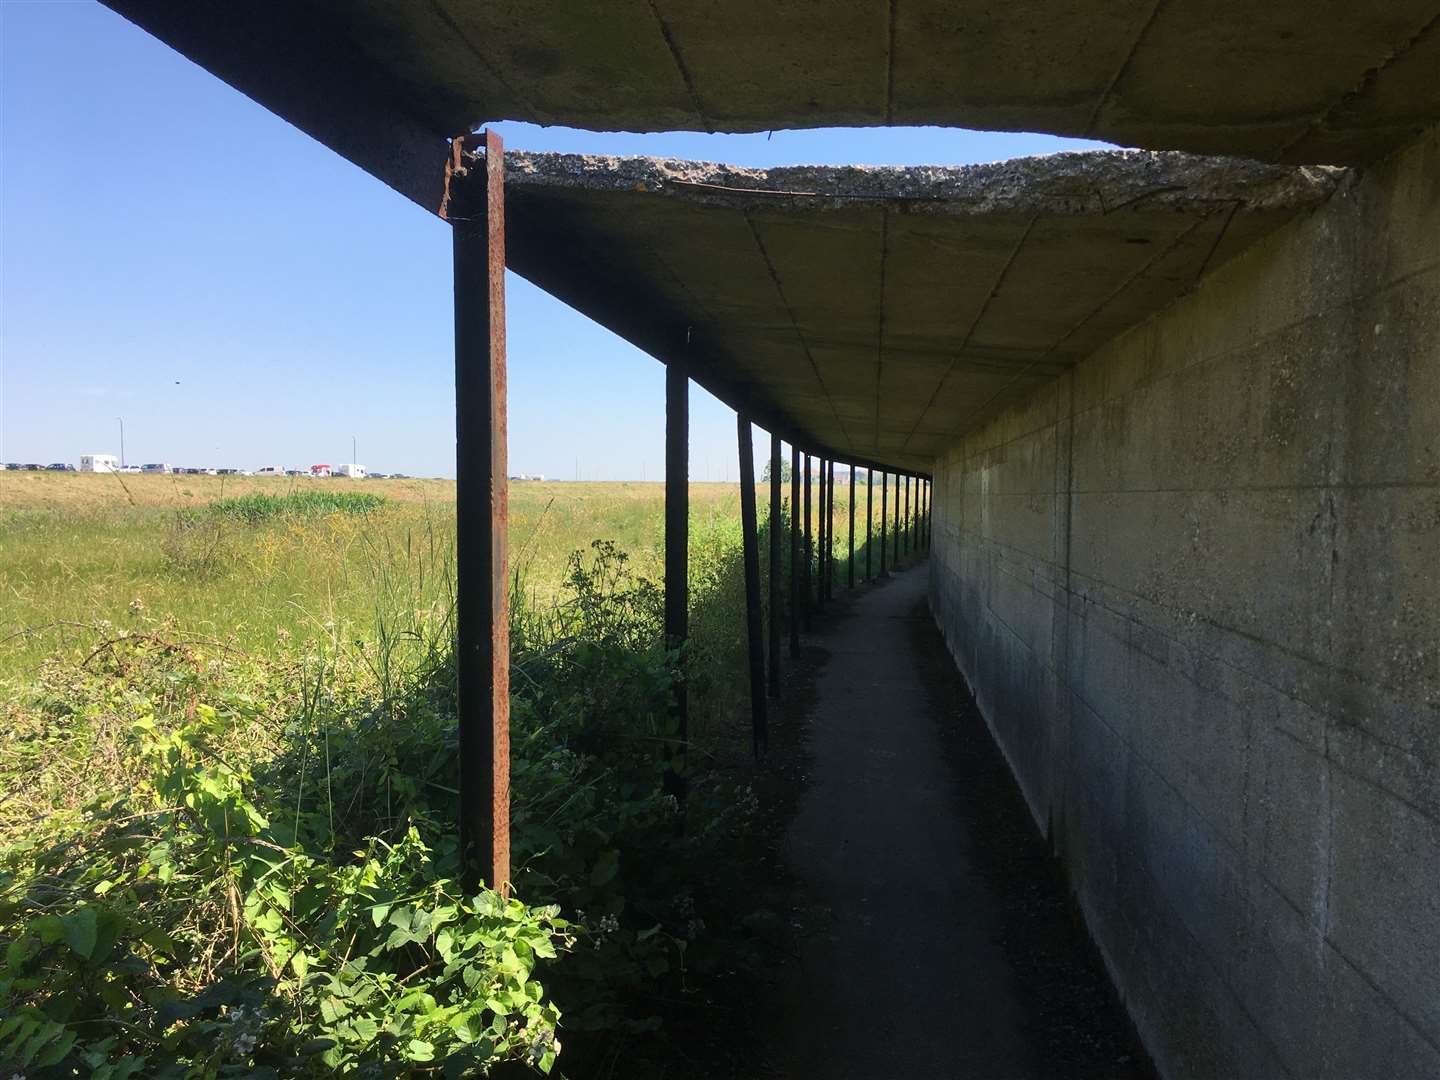 Safety fears for the crumbling roof and rusting supports, pictured in 2020, closed the covered way at Barton's Point coastal park